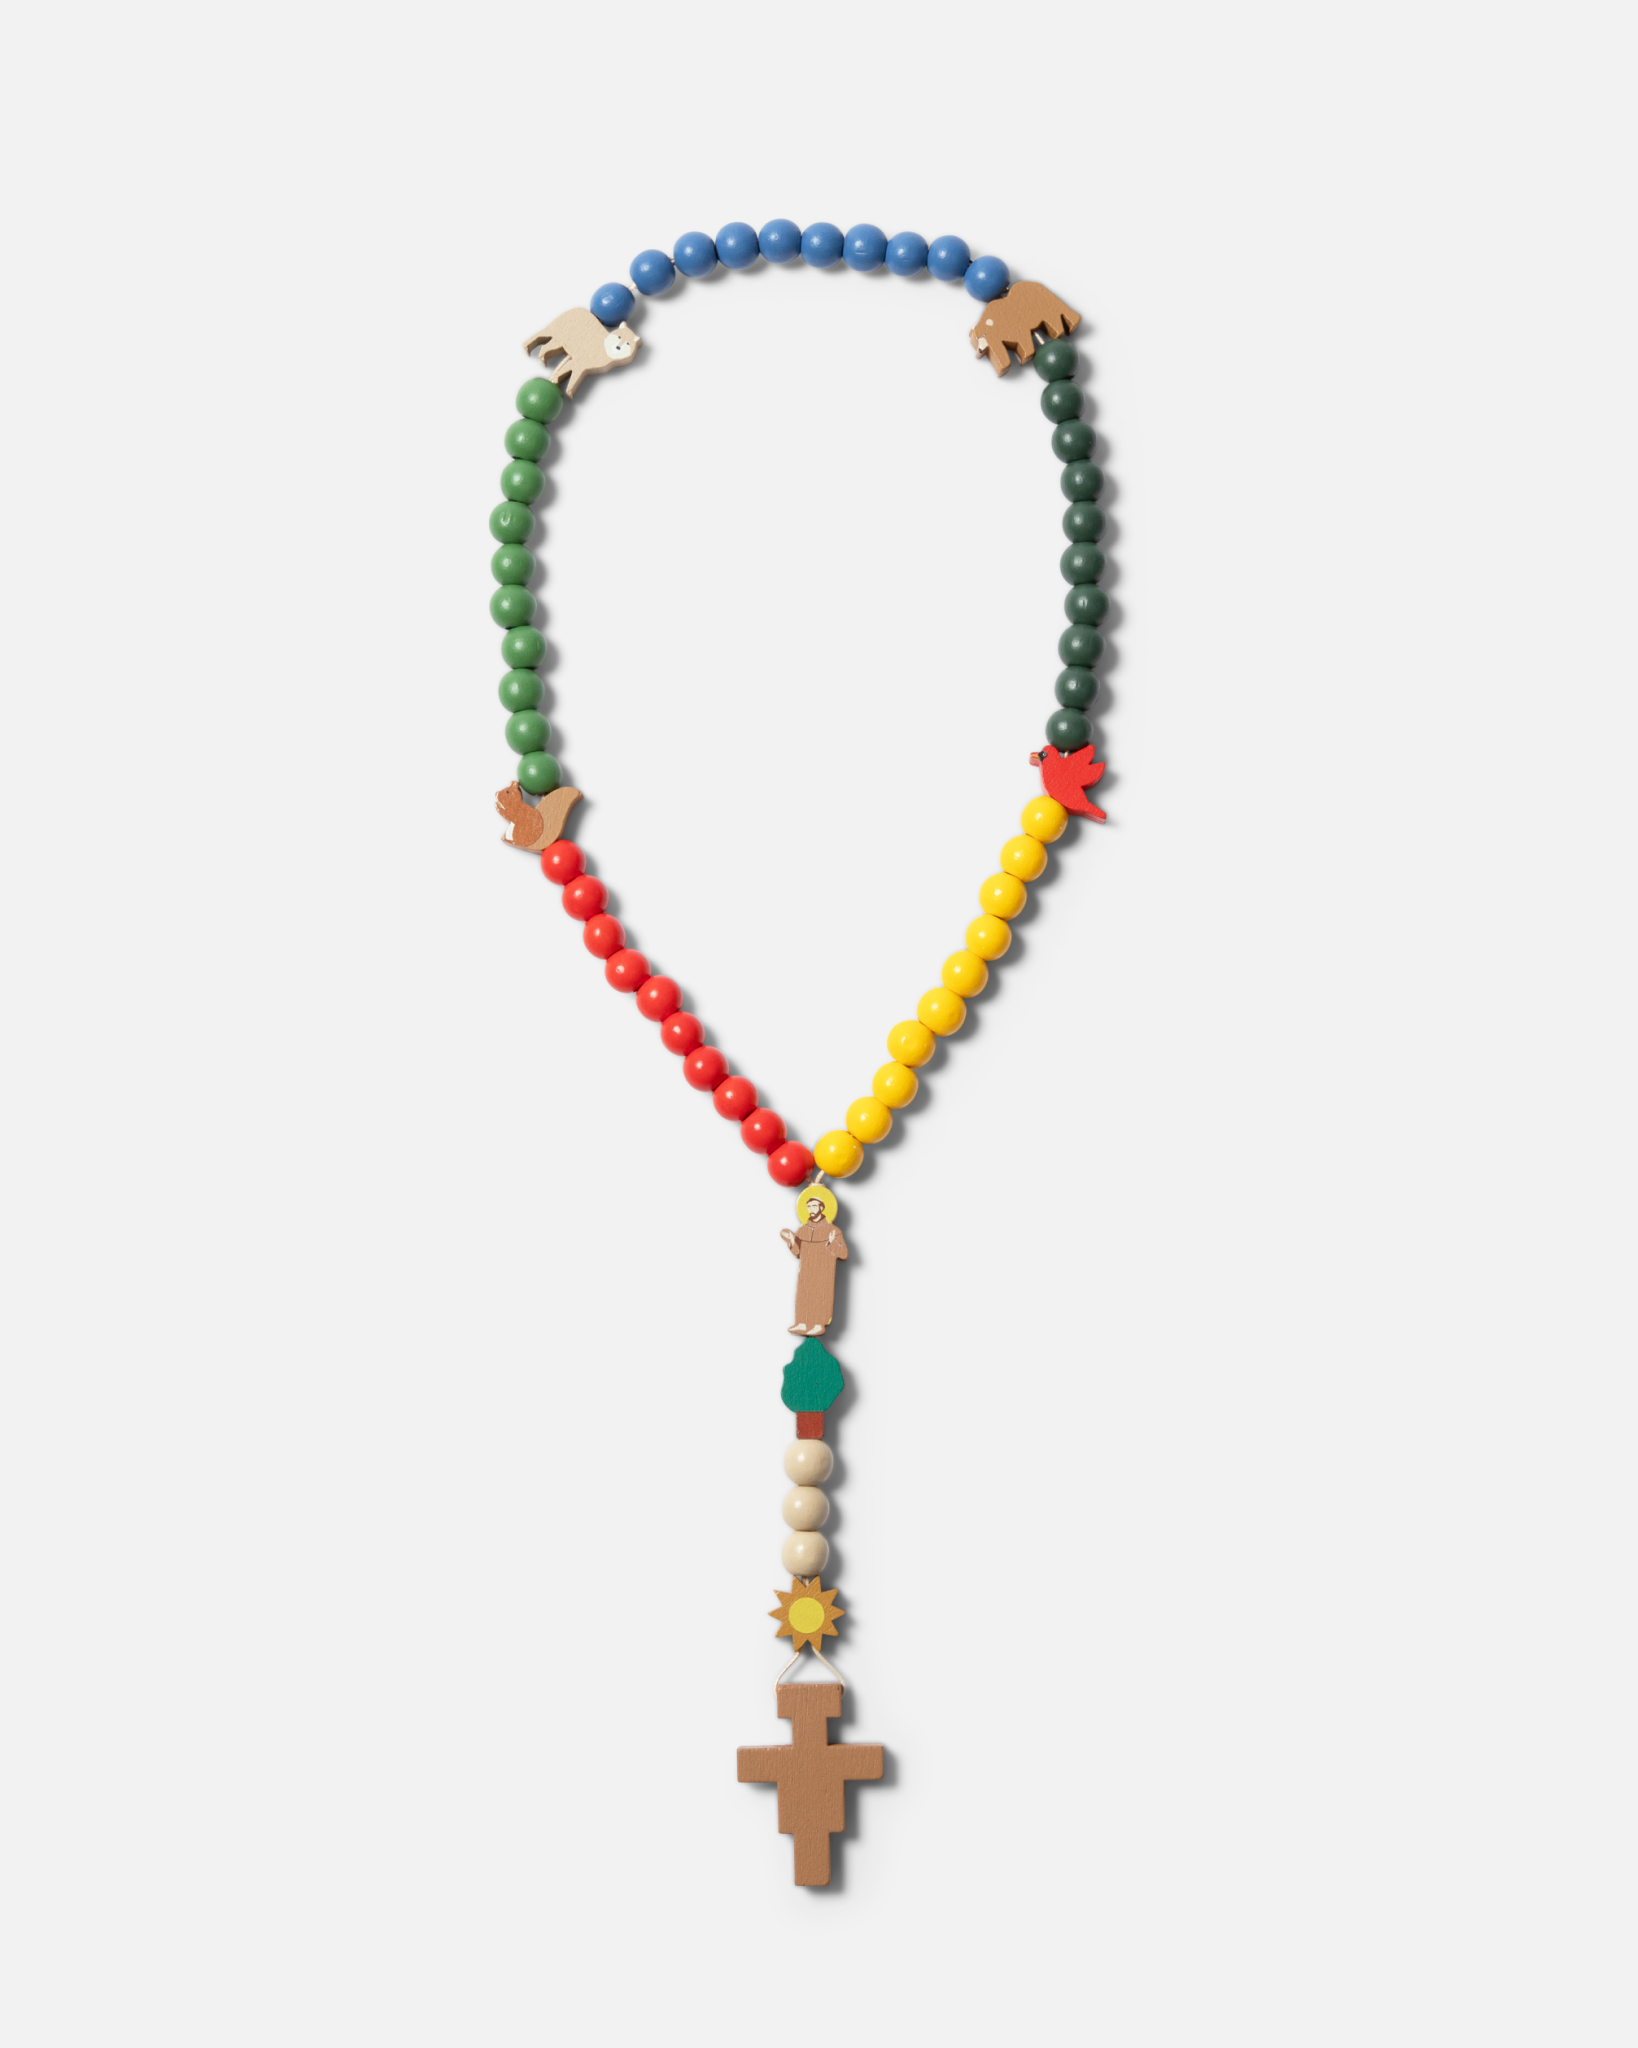 Blessed Beads Rosaries Louis (Louis IX; King of France)